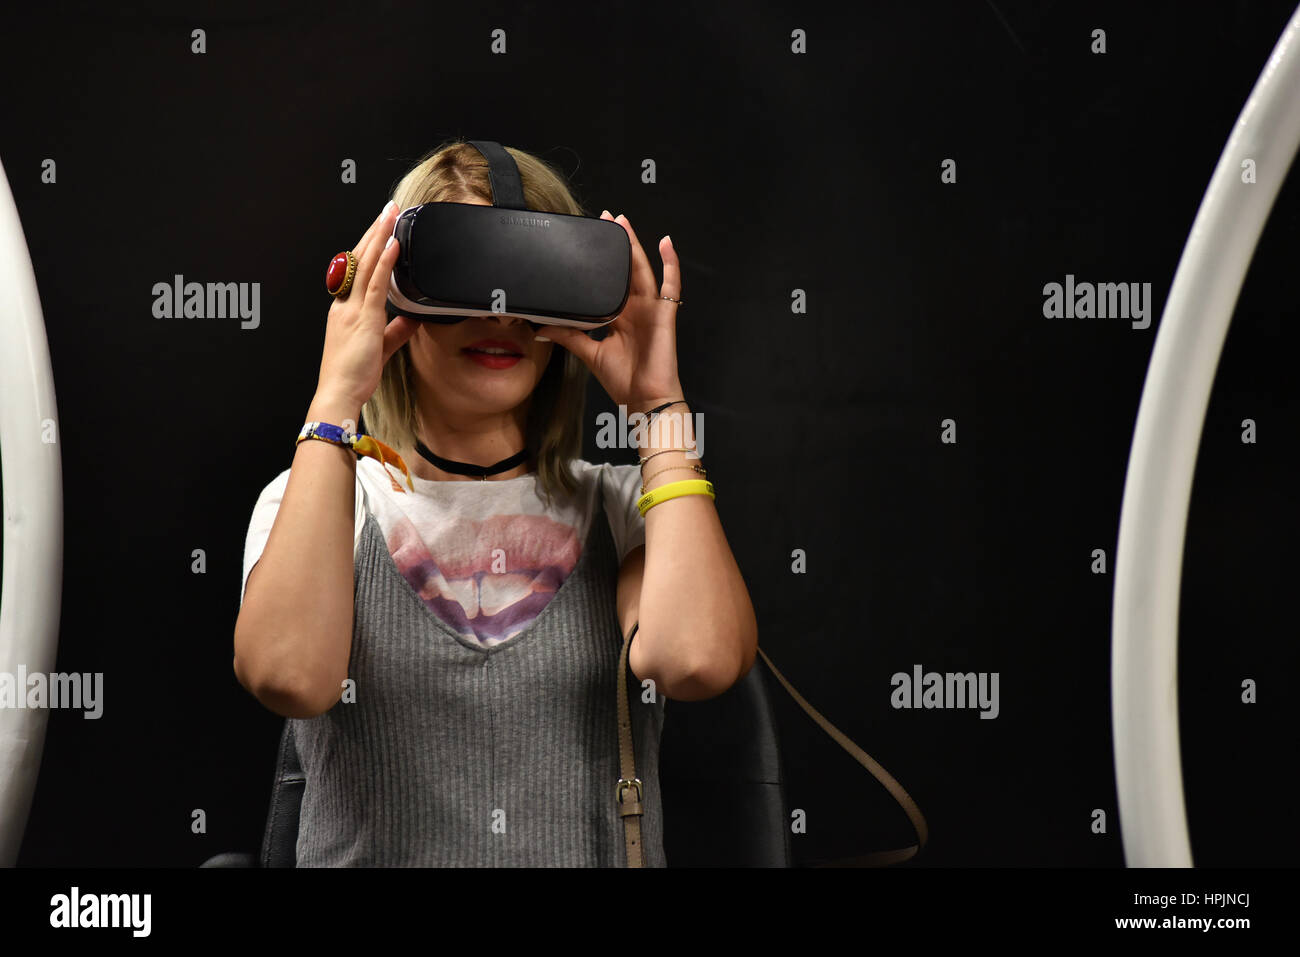 CLUJ-NAPOCA, ROMANIA - AUGUST 7, 2016: Girl tries virtual reality Samsung Gear VR headset and hand controls during the virtual reality exposition, at  Stock Photo